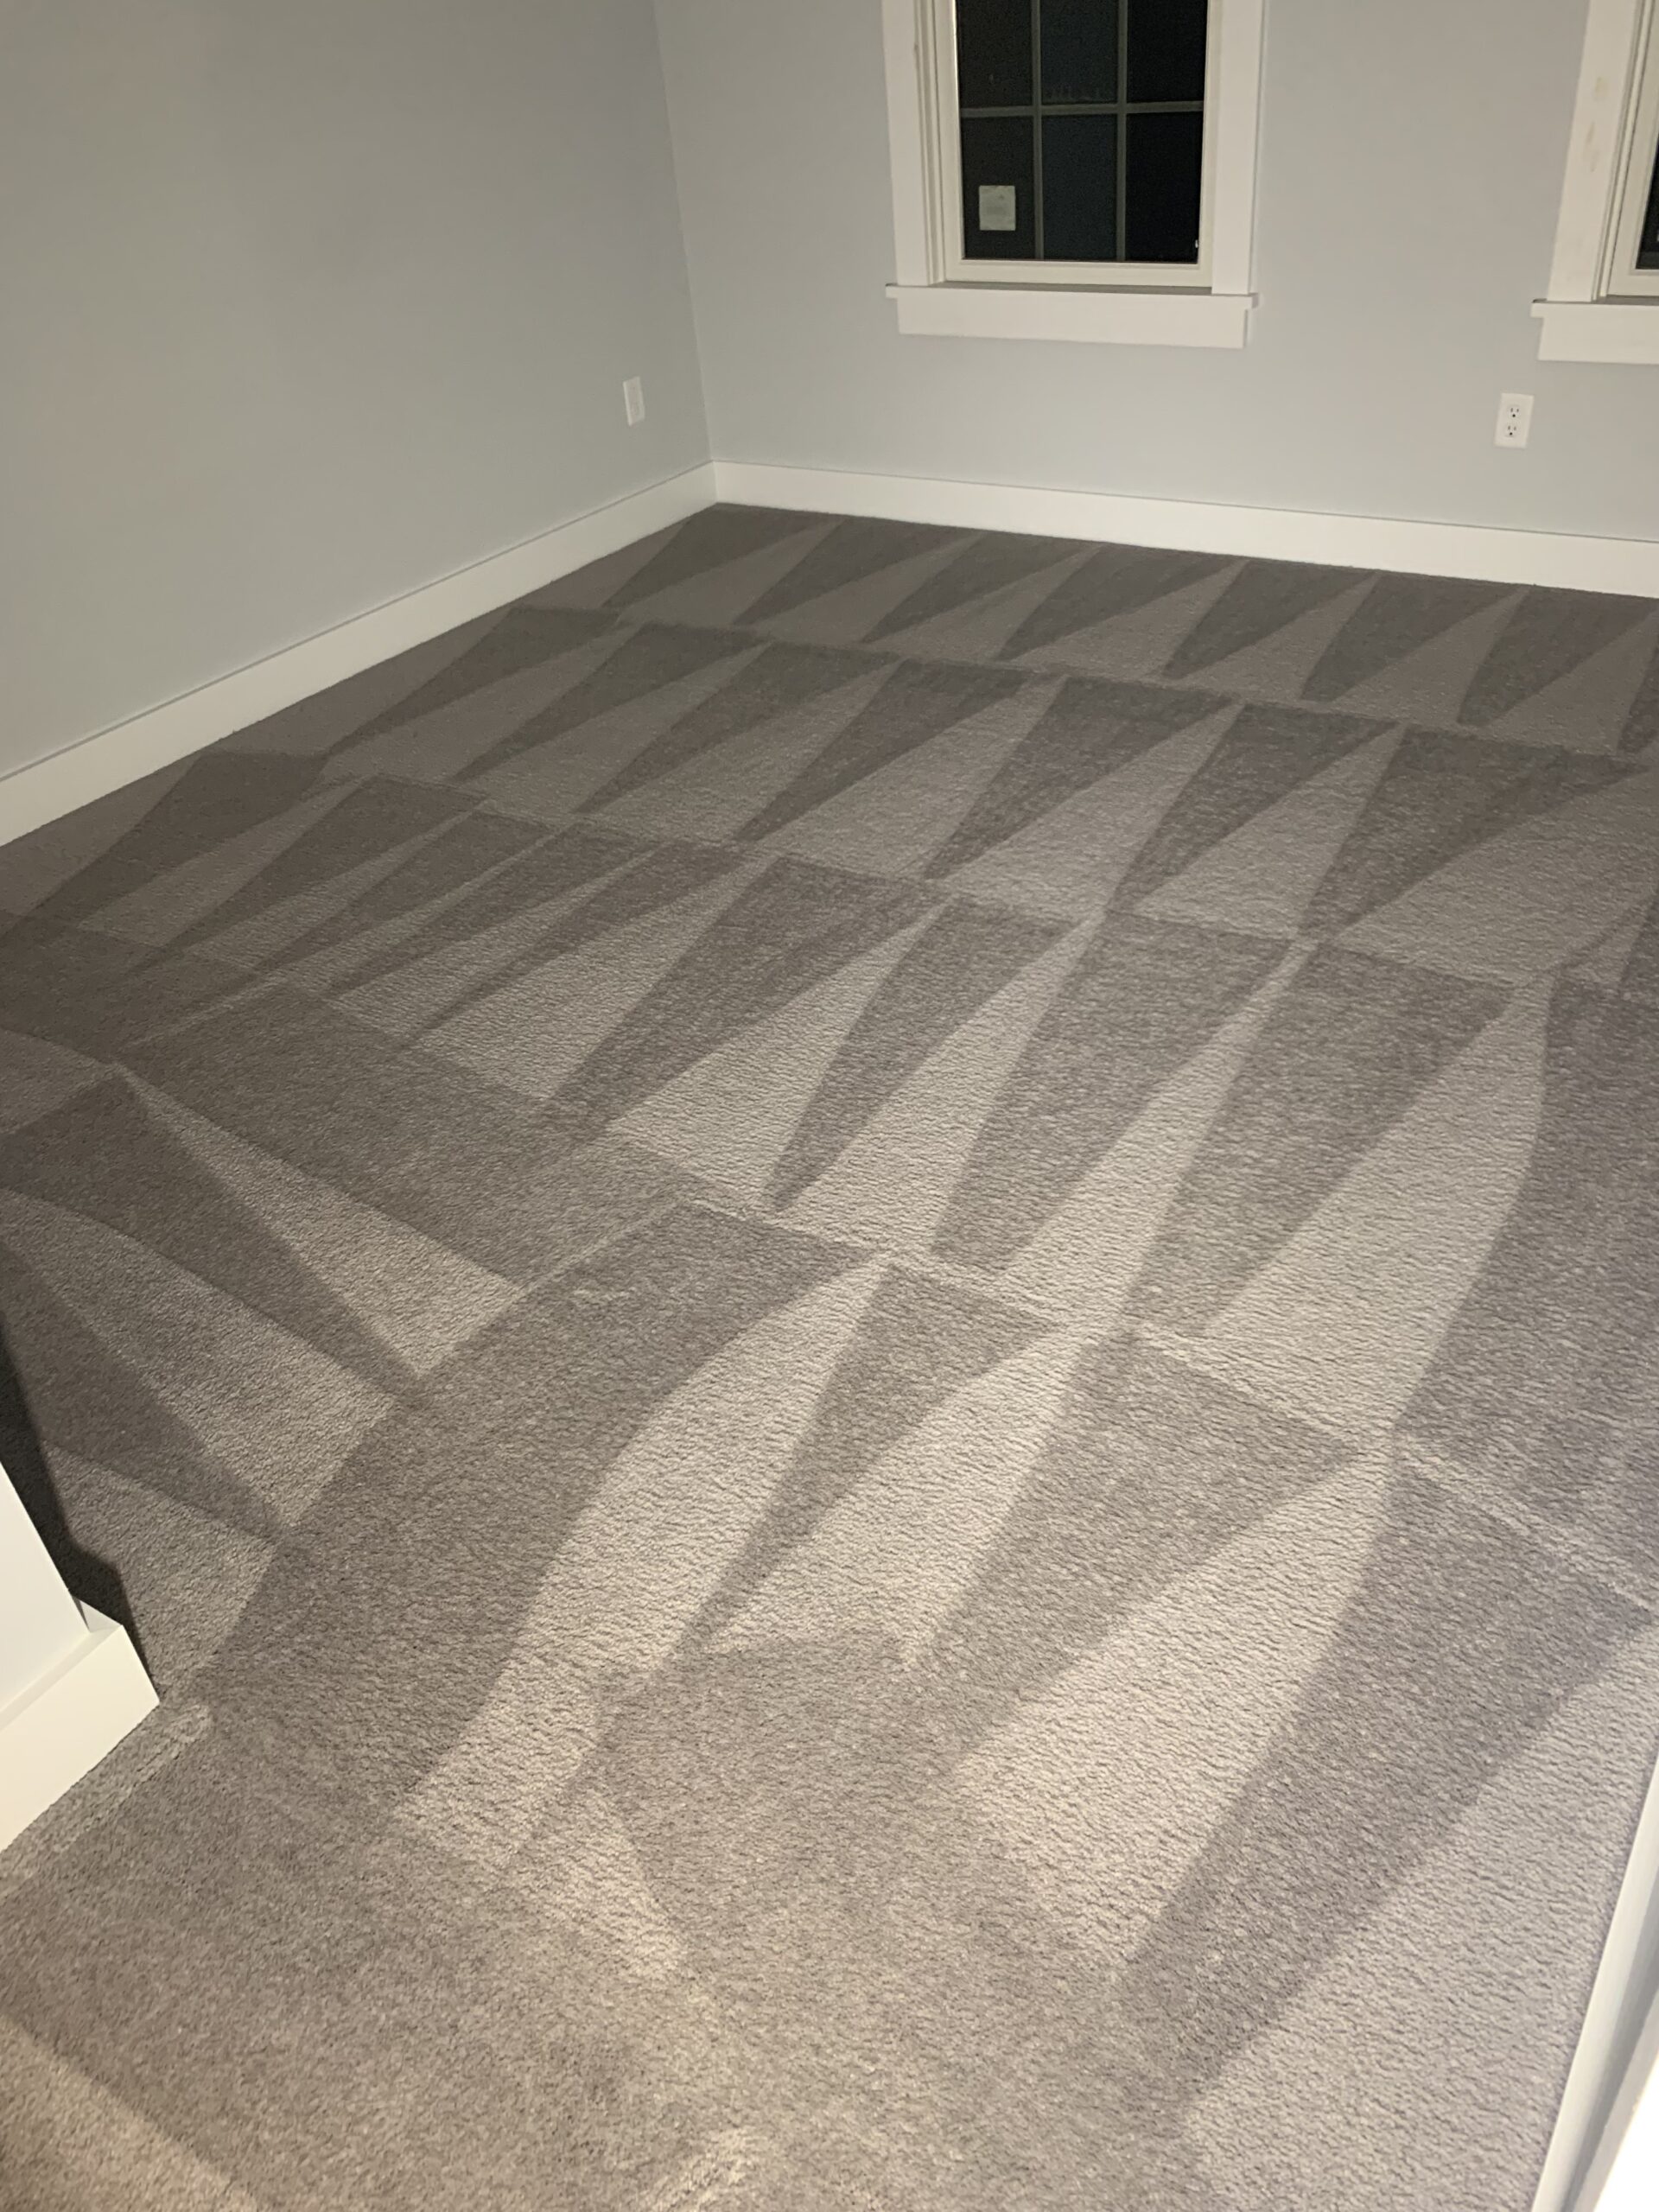 Quality Carpet Cleaning: Elevating standards in Clark NJ